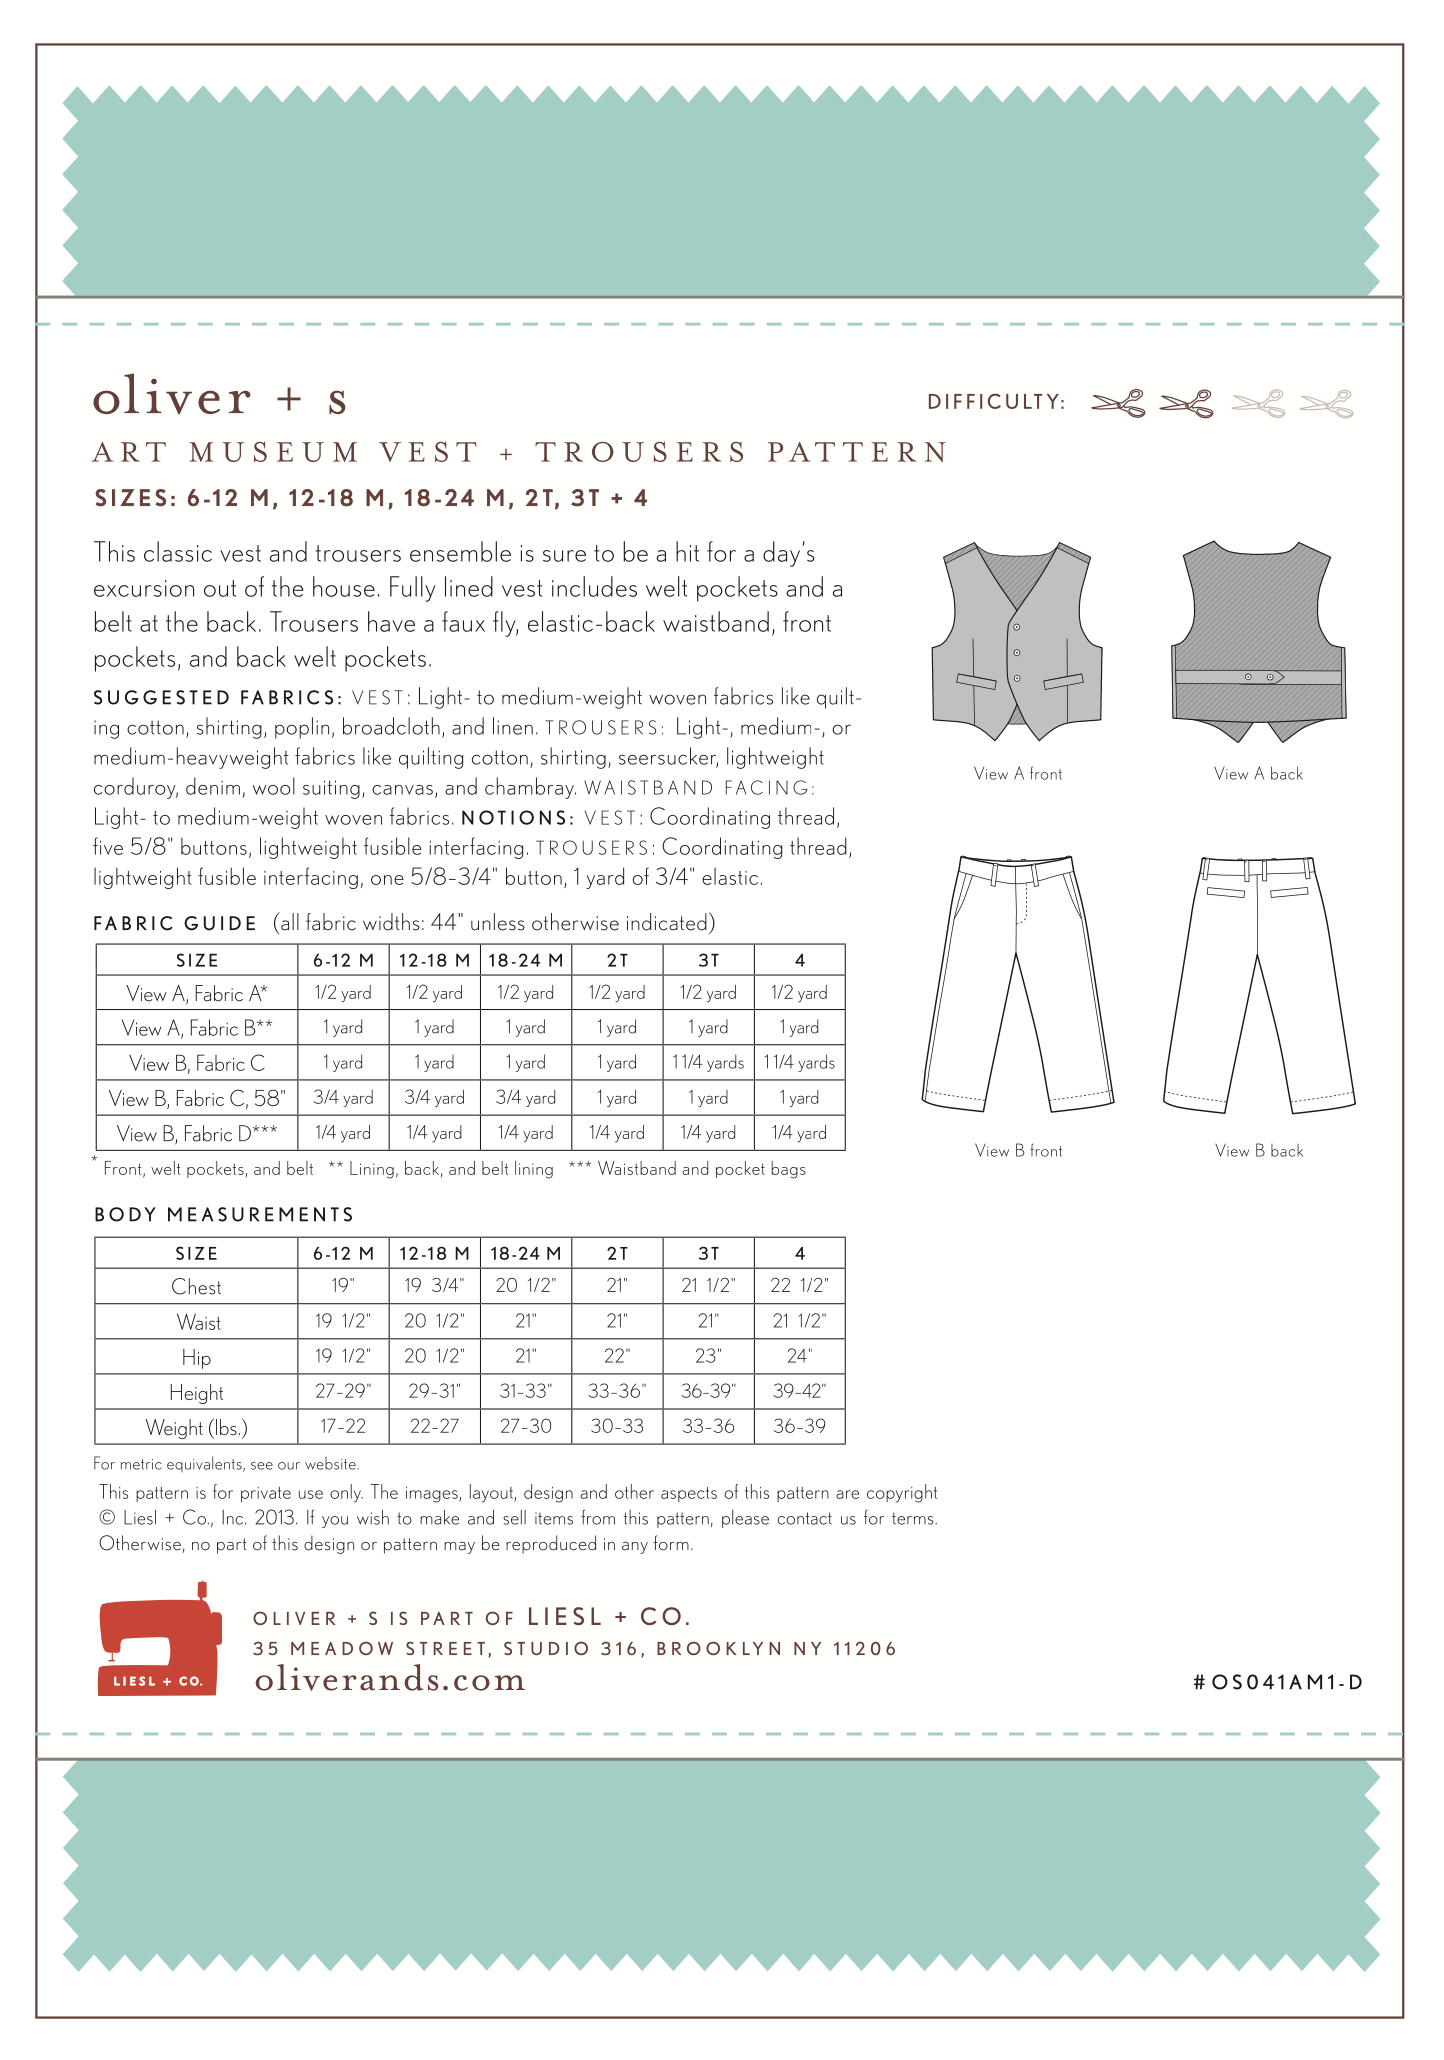 Oliver + S Art Museum Vest and Trousers